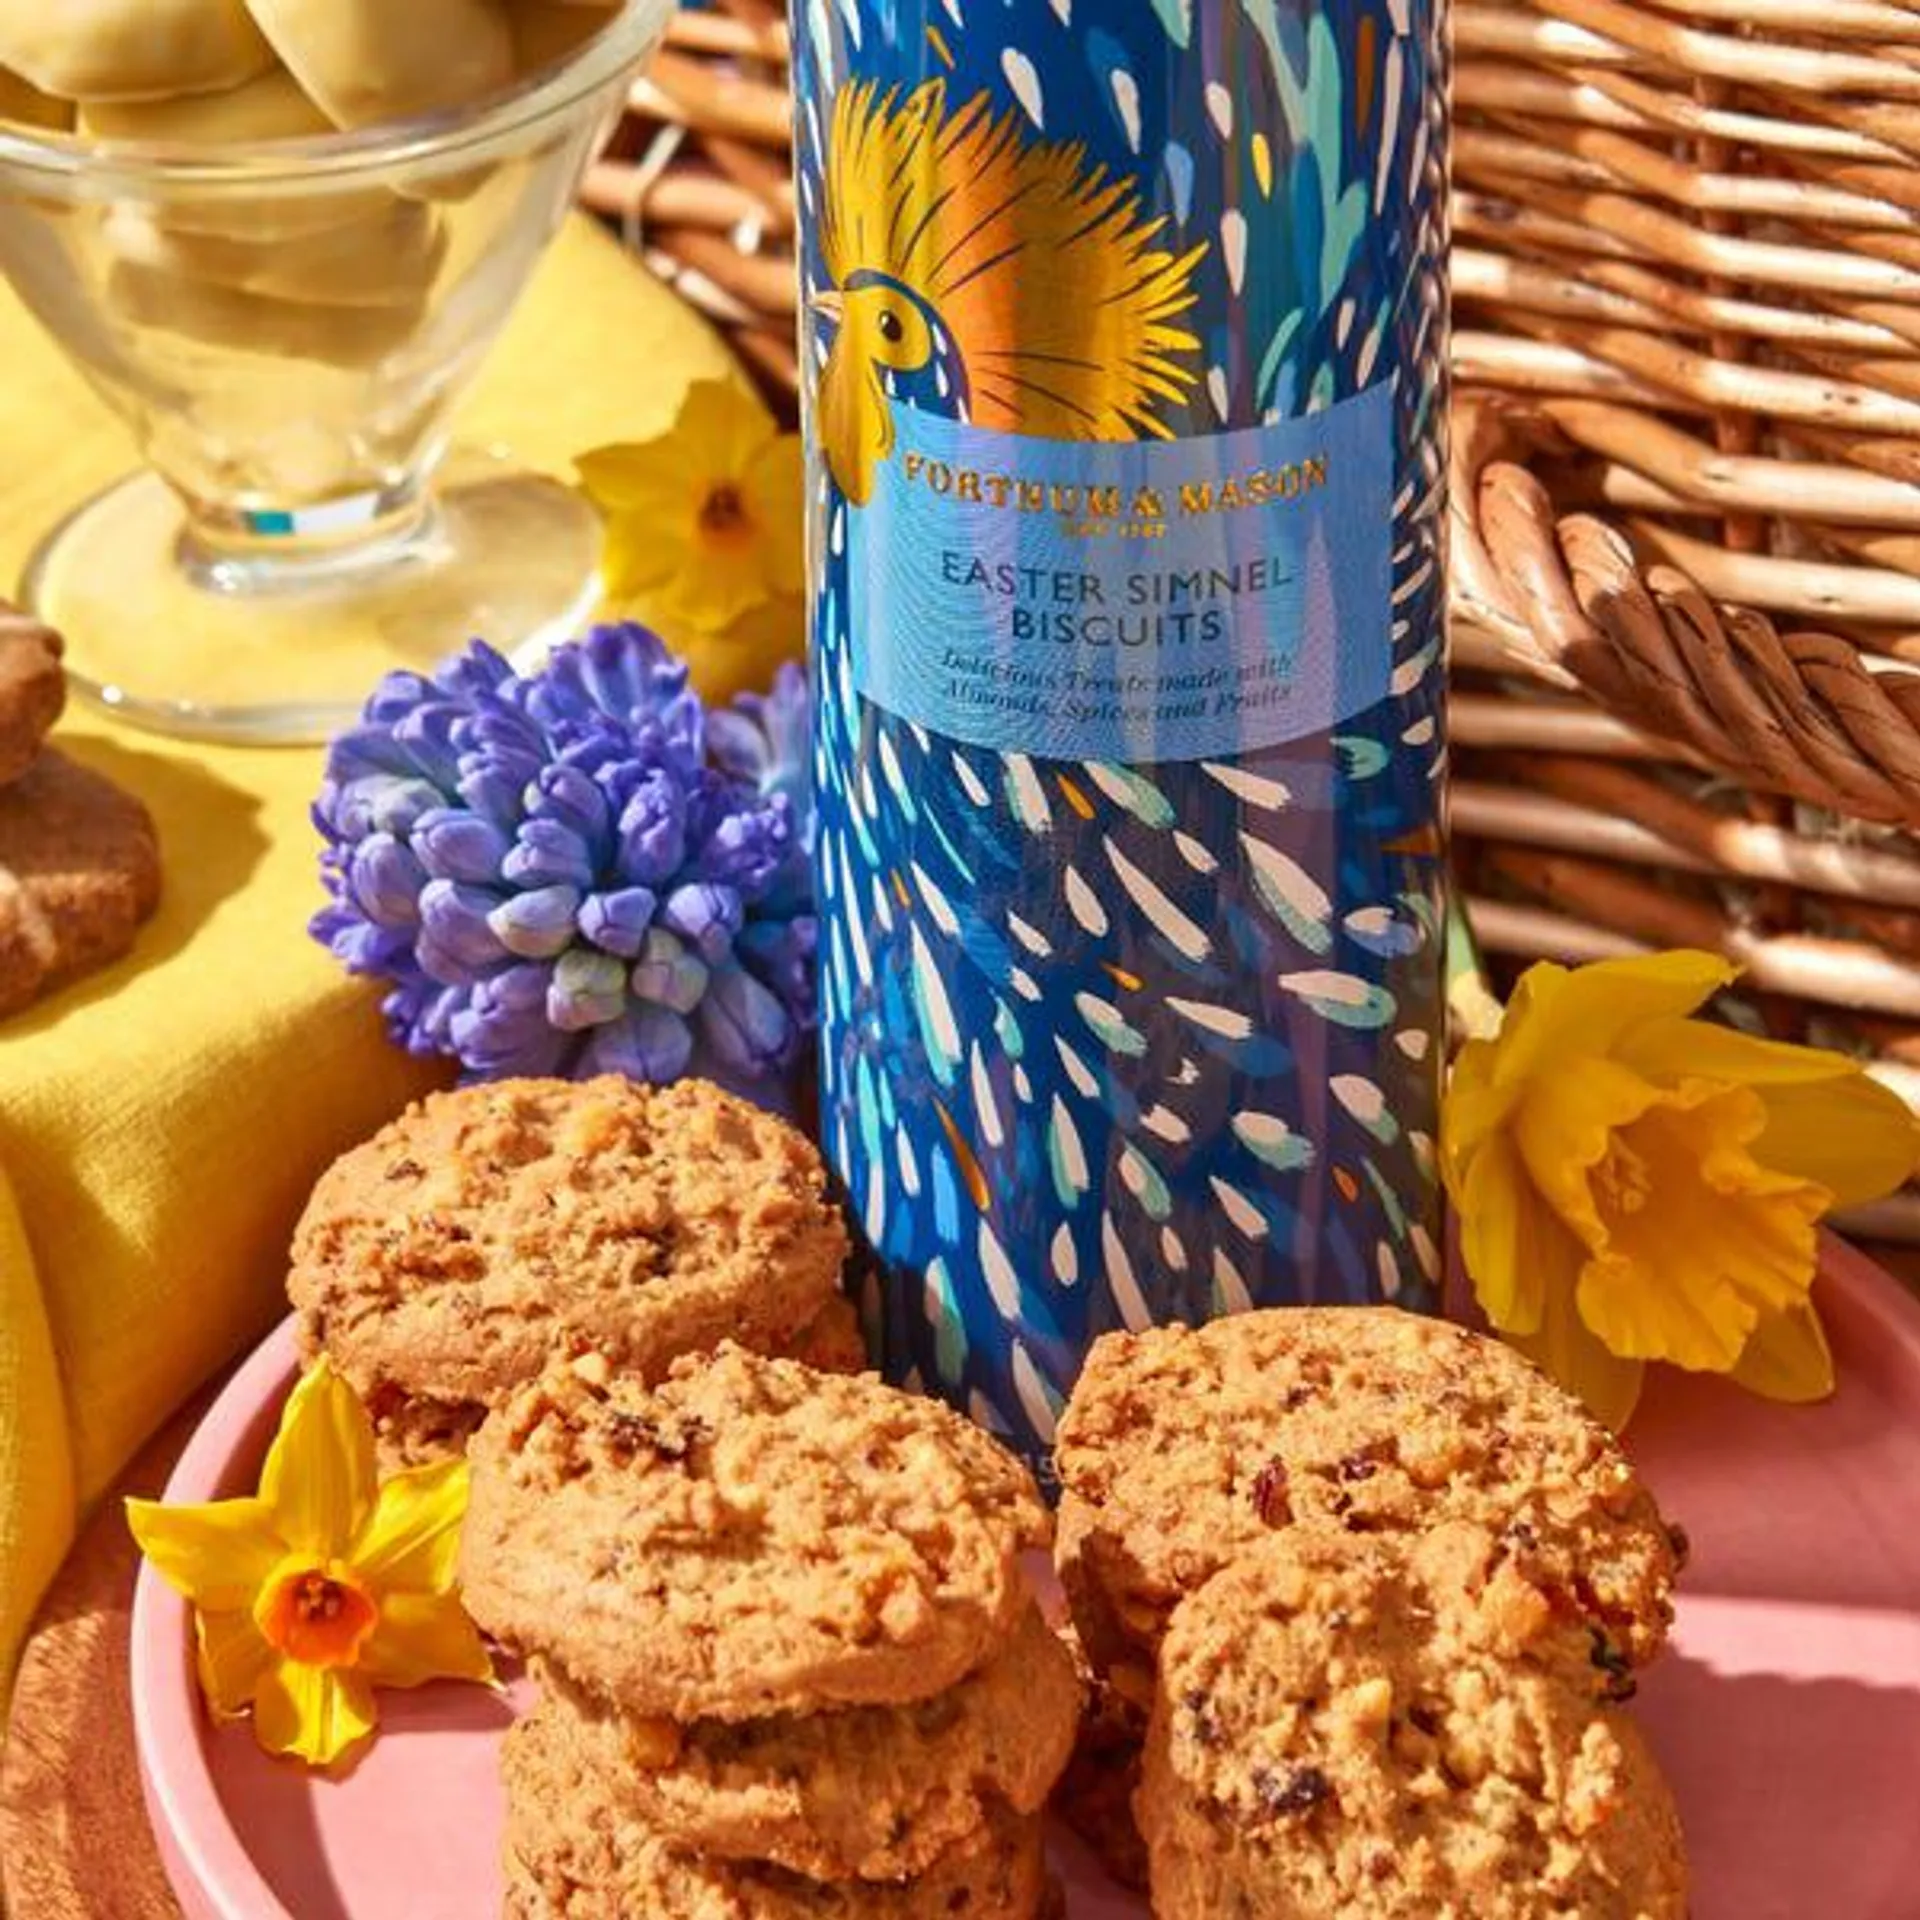 Easter Simnel Biscuit Tin, 150g